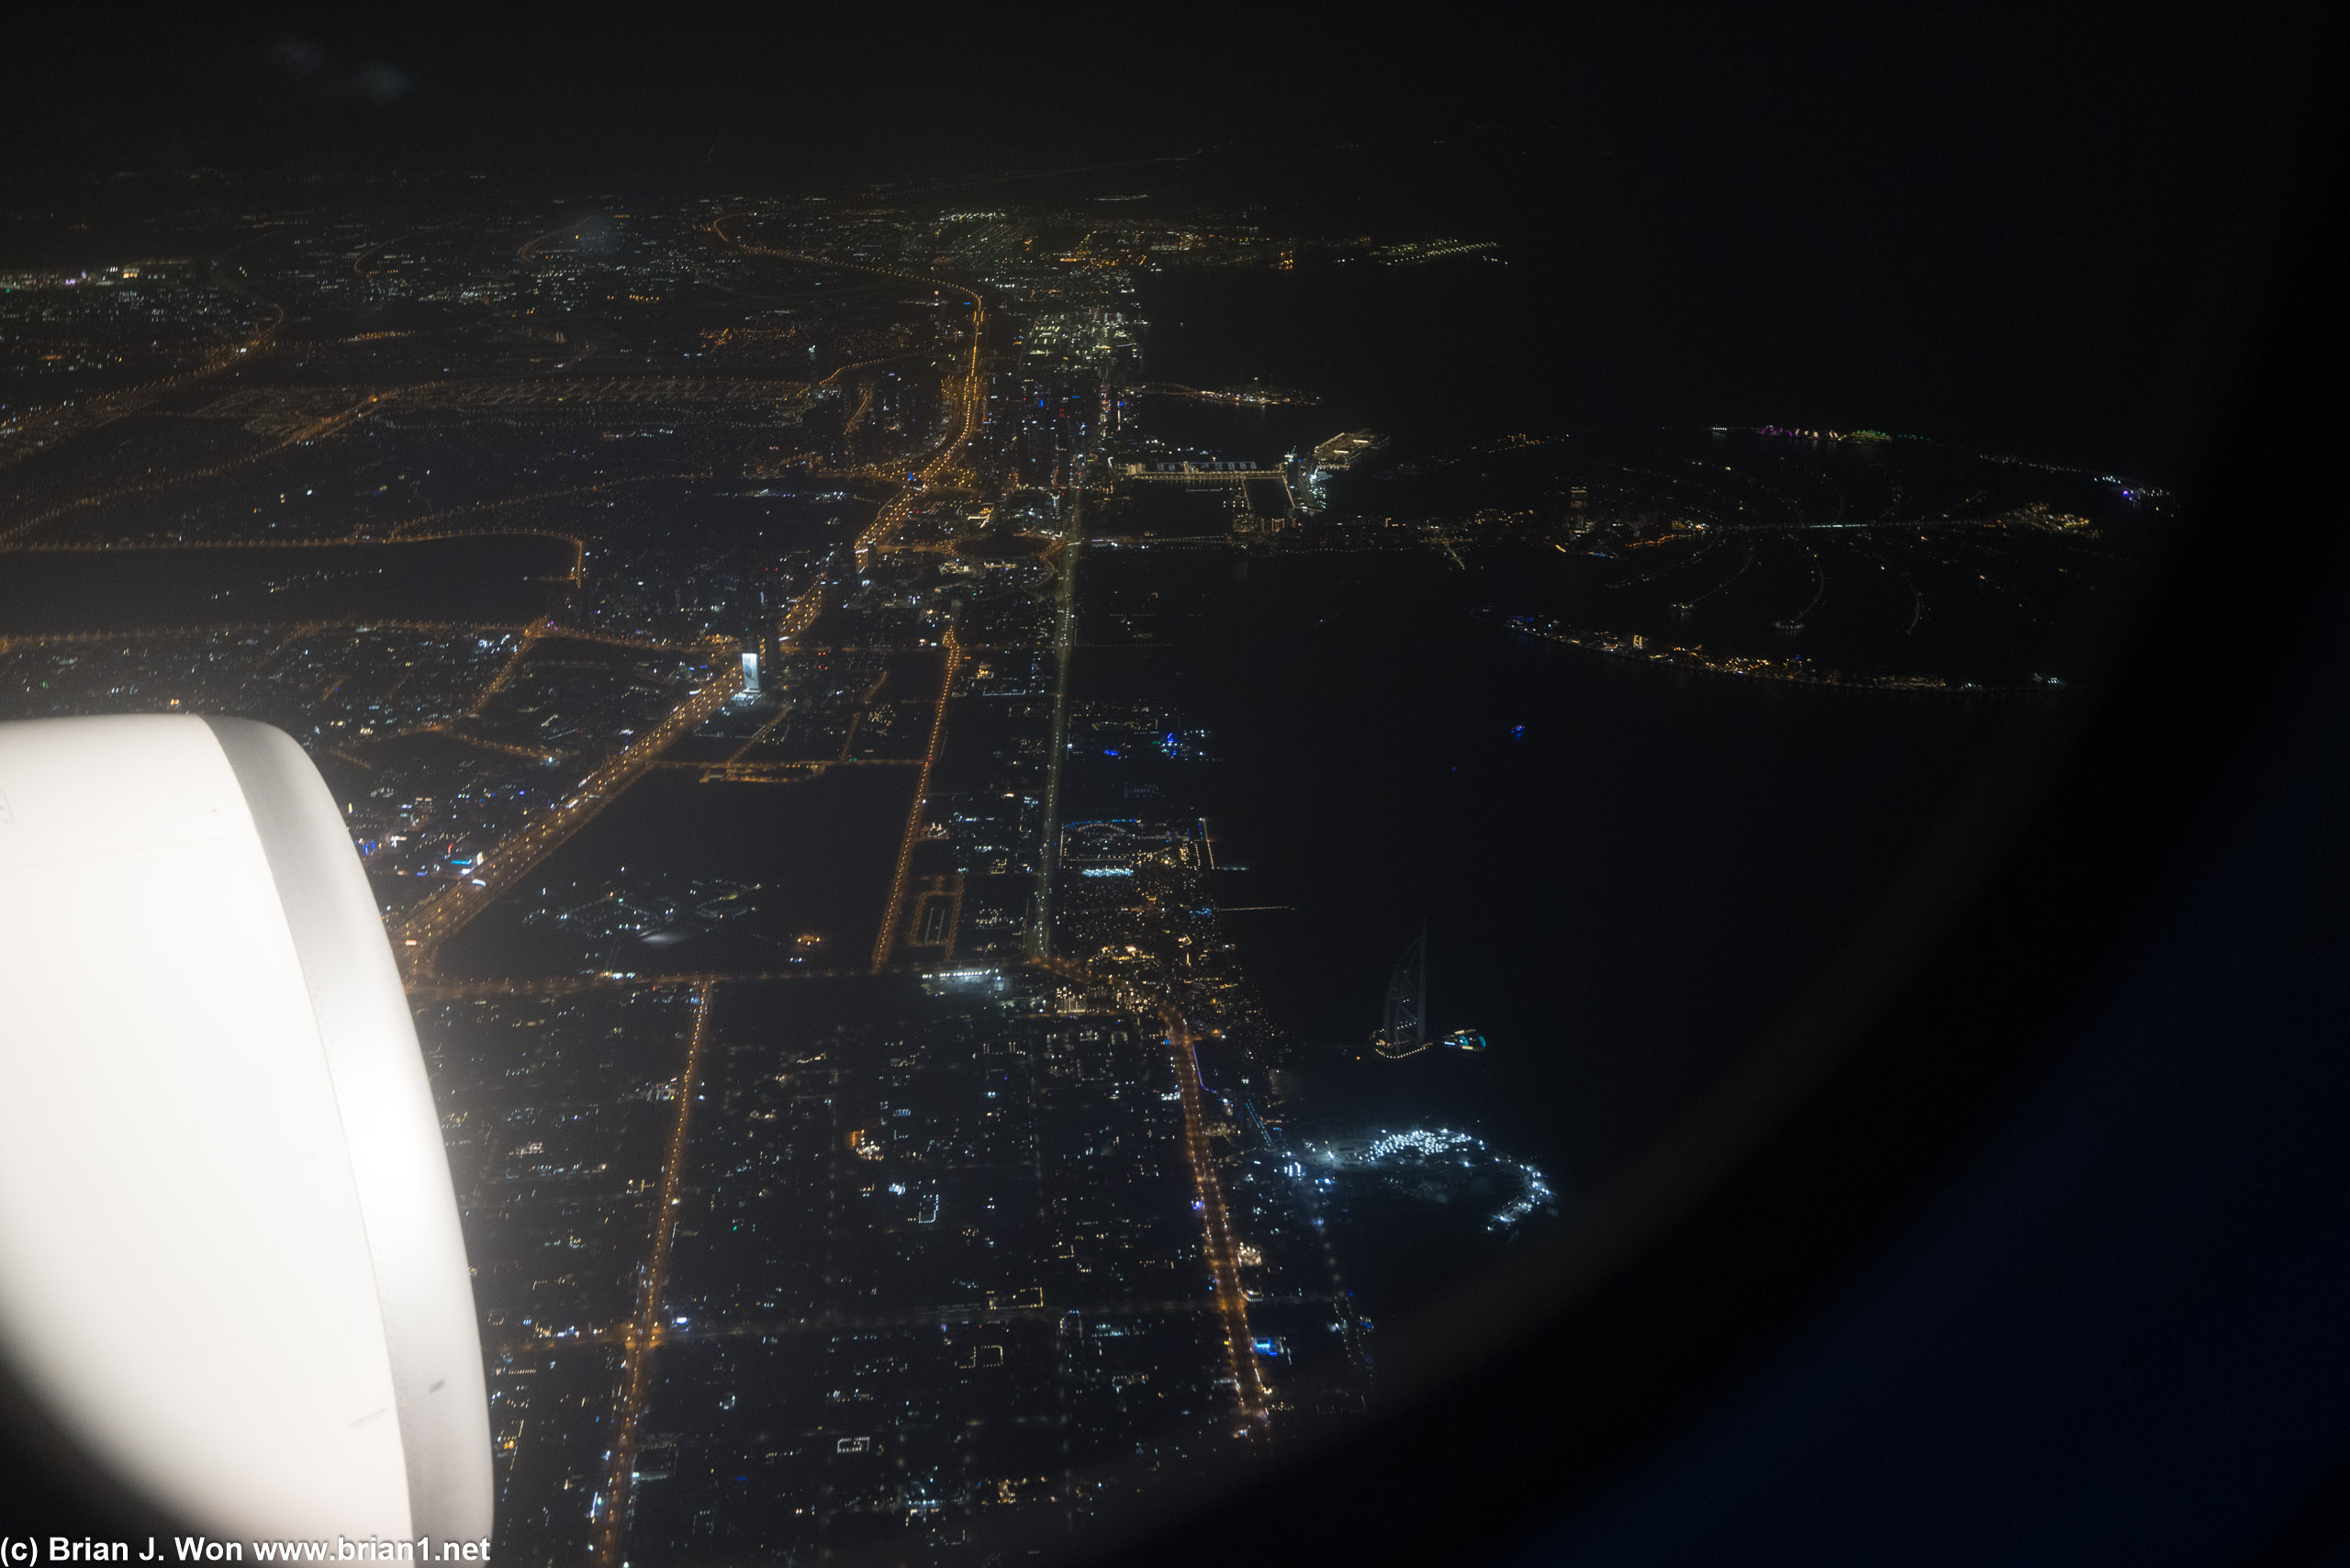 Climbing out with downtown Dubai and The Palm Jumeirah in the distance, the Burj Al Arab in the foreground.